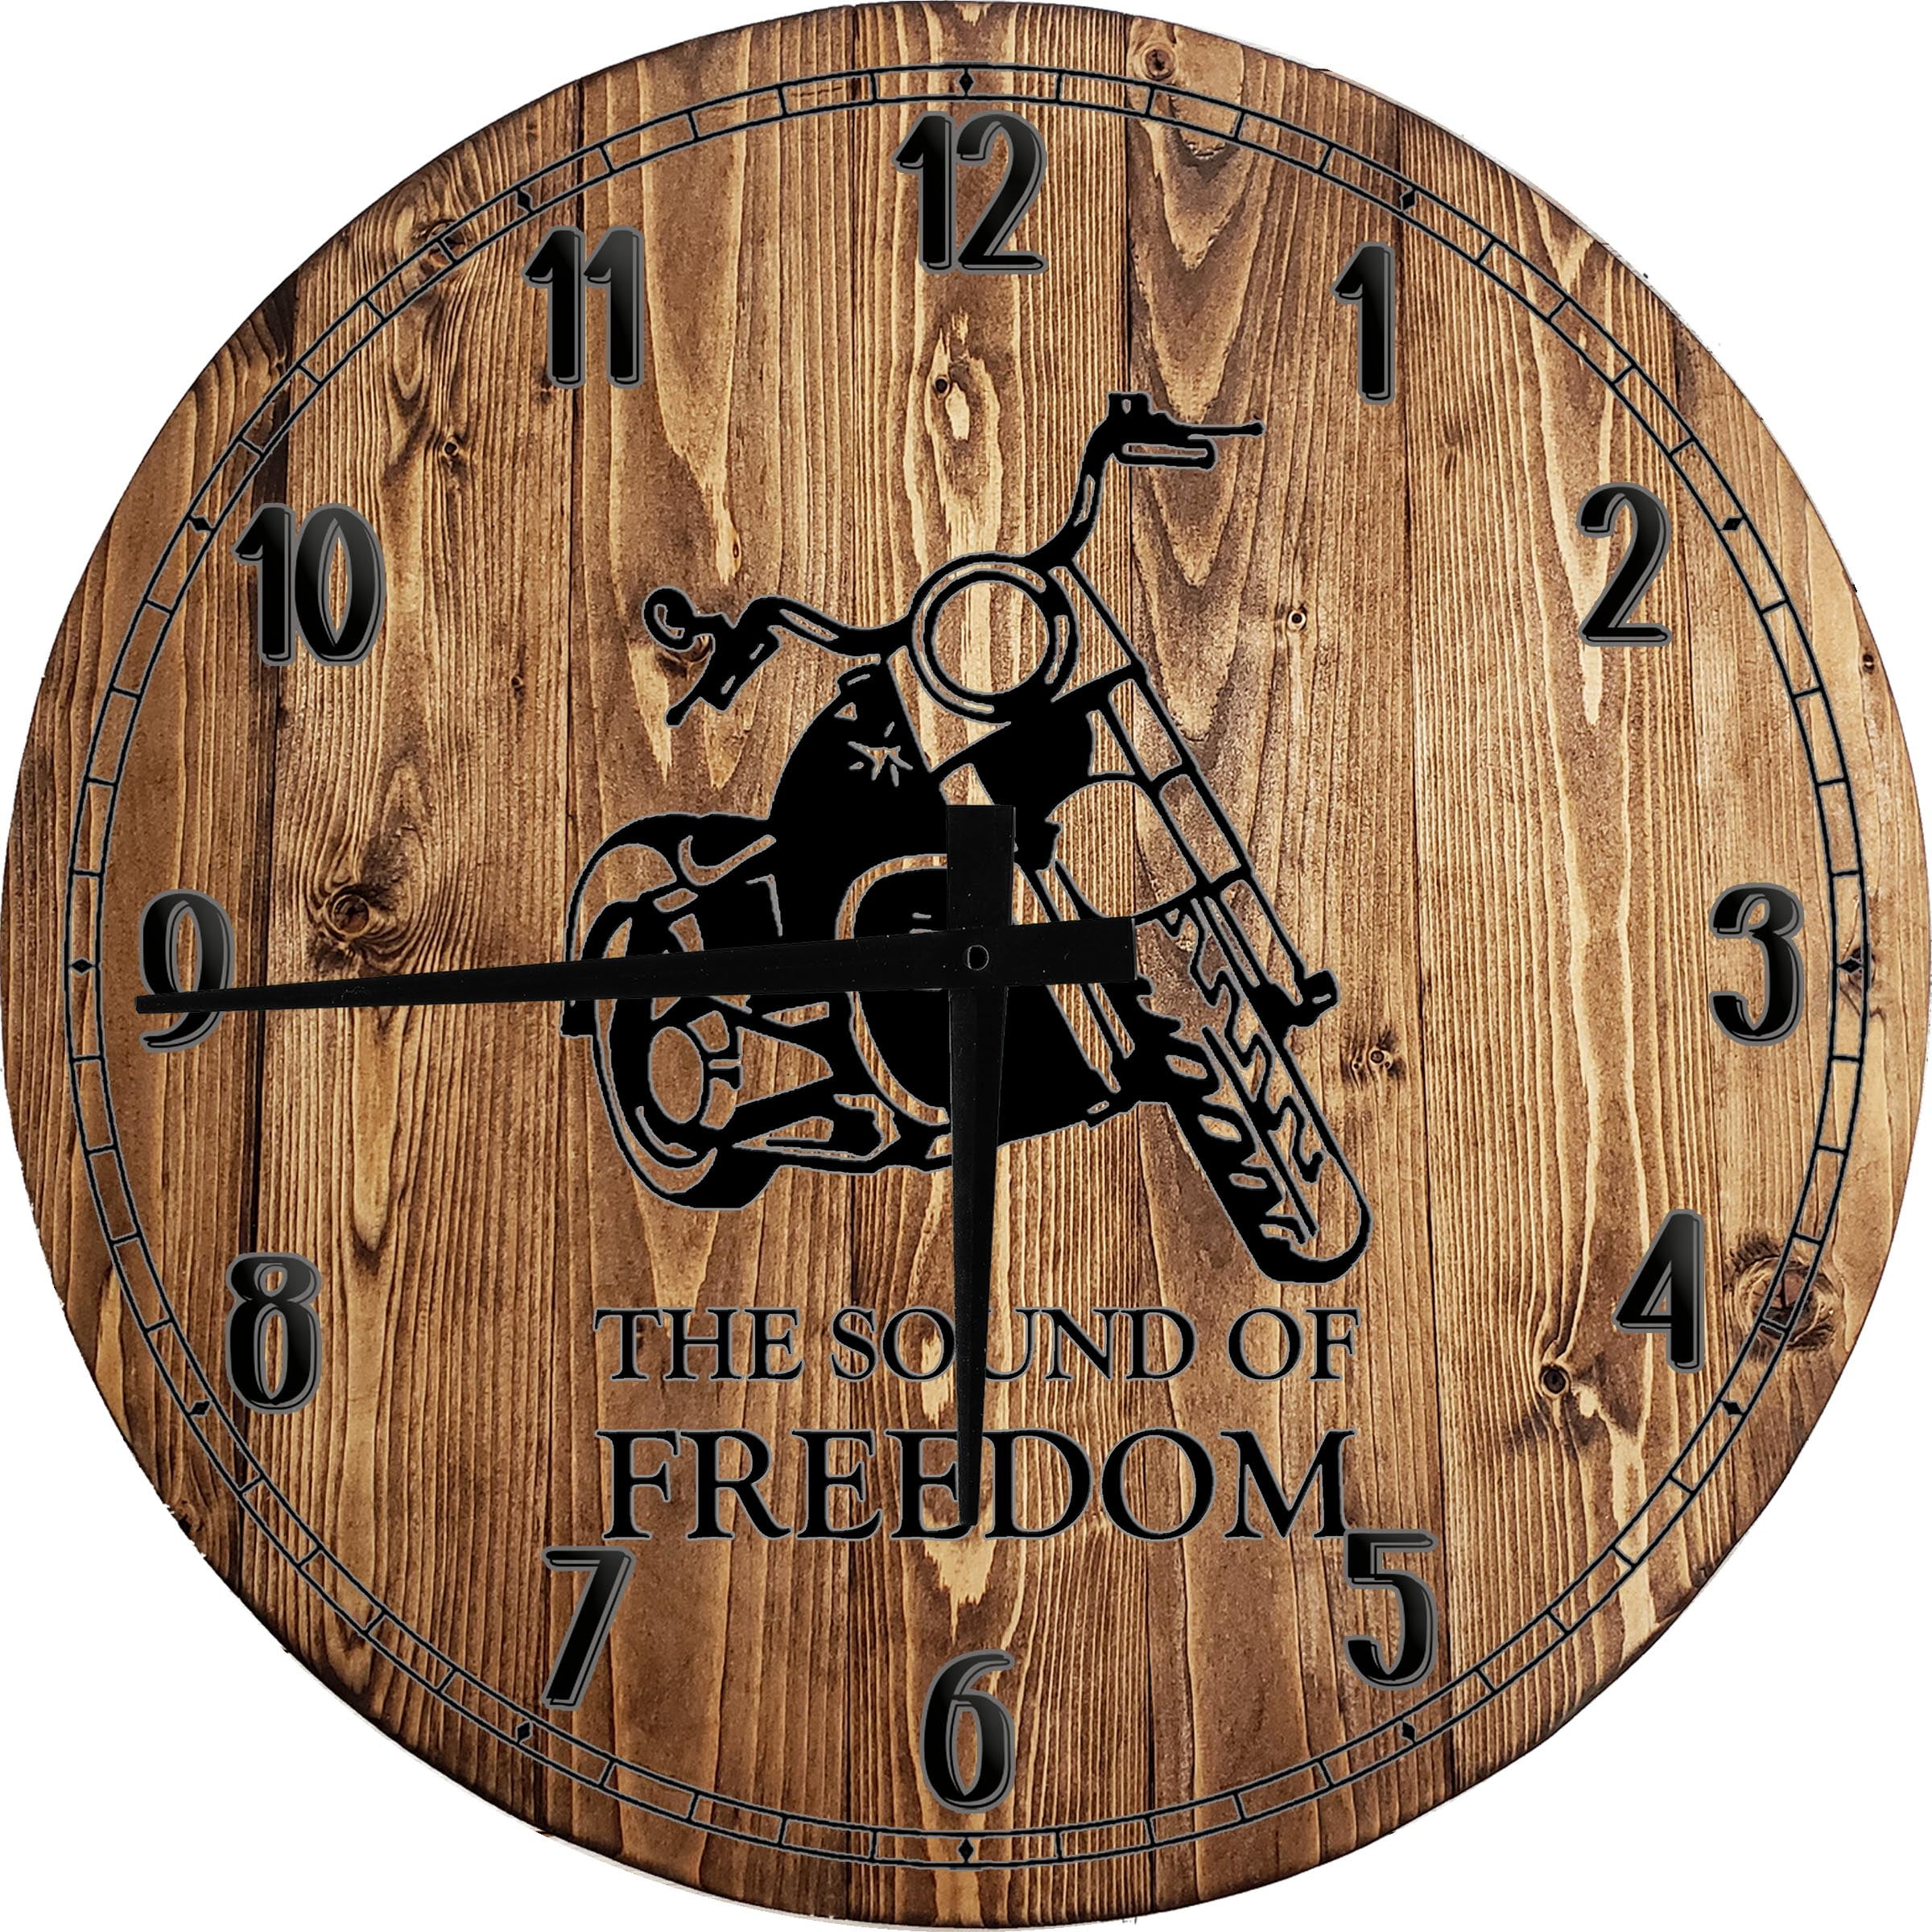 10 Inch Wall Clock Wooden Wall Clock Silent Non-Ticking Vintage Rustic Country Coastal Wall Clocks 